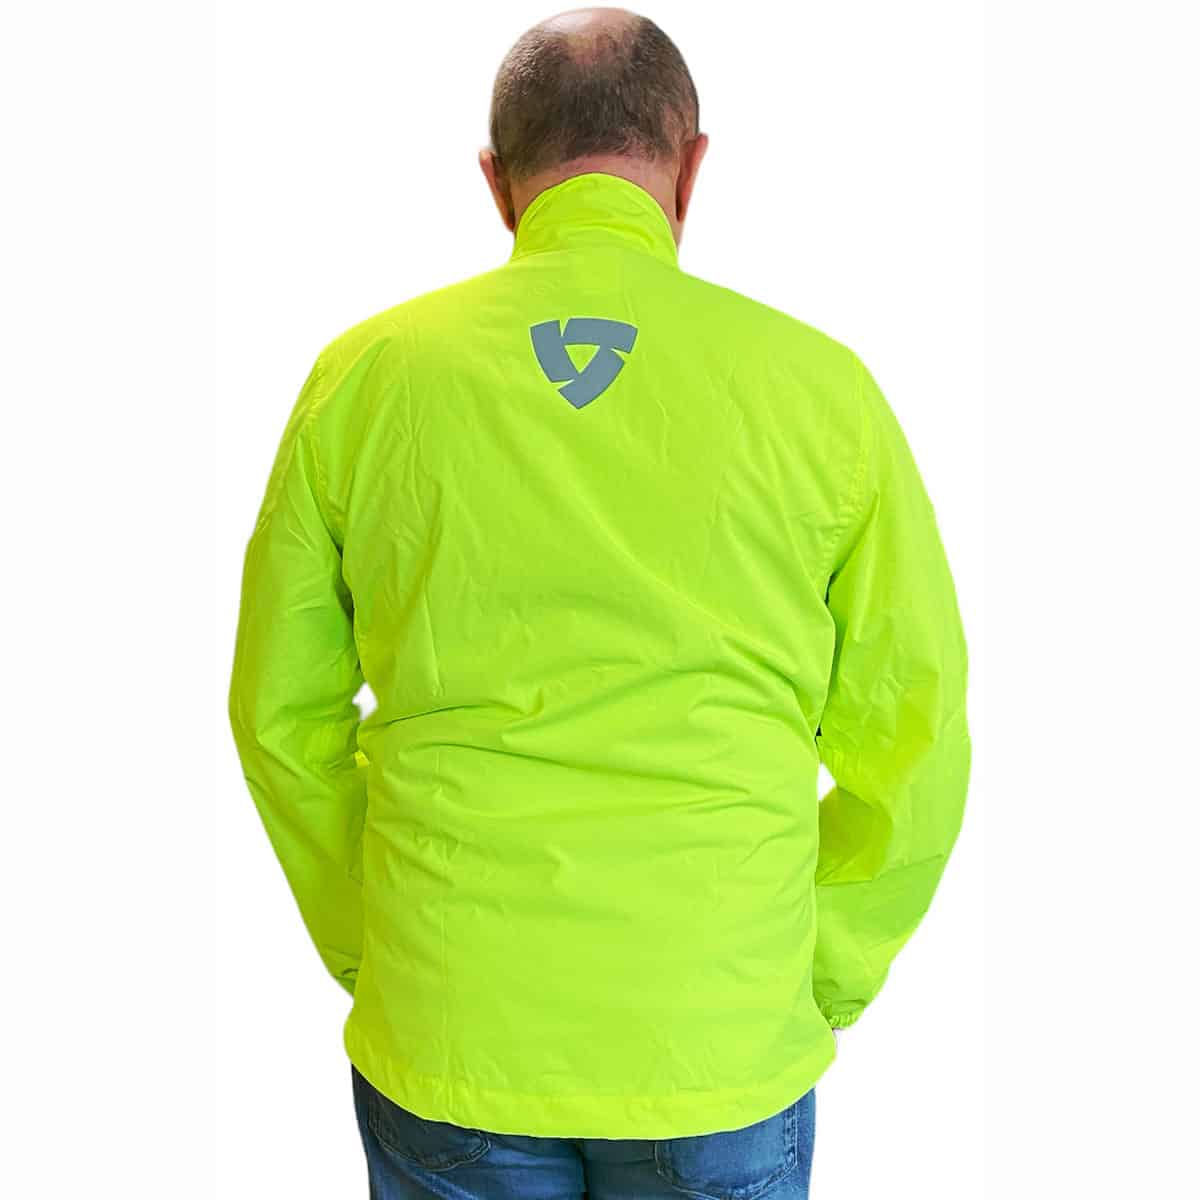 Rev It! Cyclone 4 Rain Over Jacket: Designed to endure even in a pouring downpour